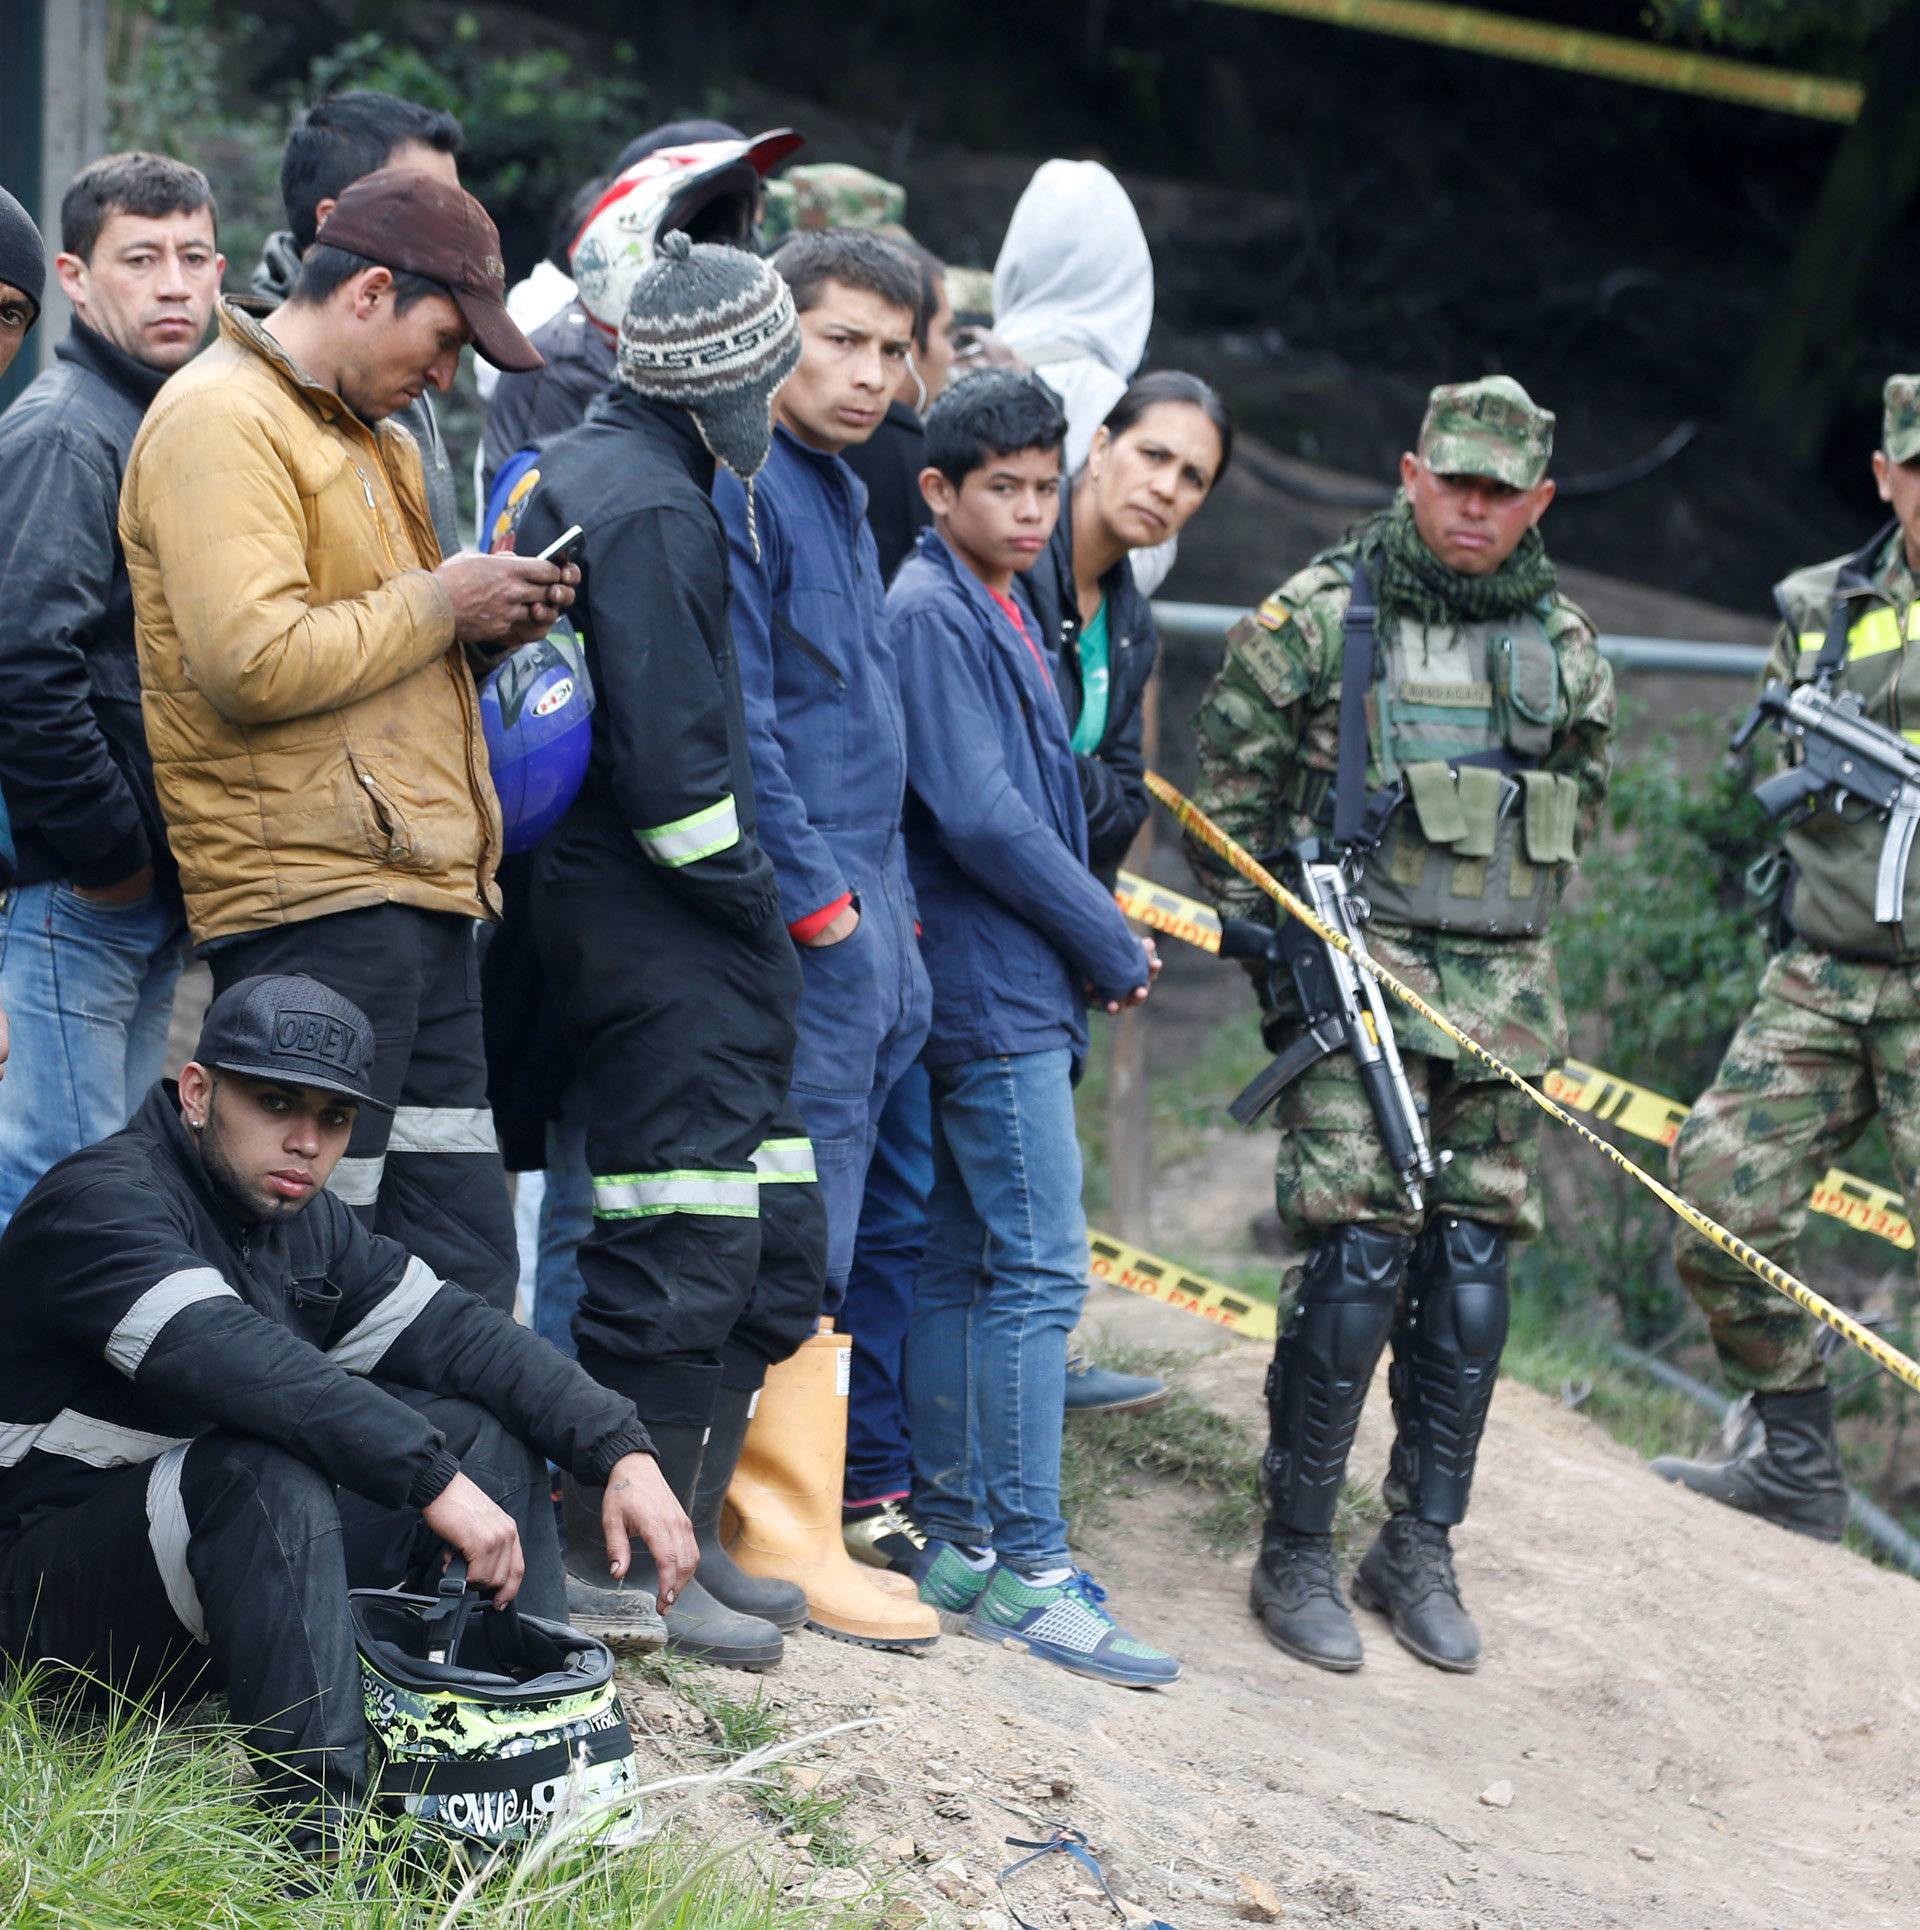 People wait for news after an explosion at an underground coal mine on Friday, in Cucunuba